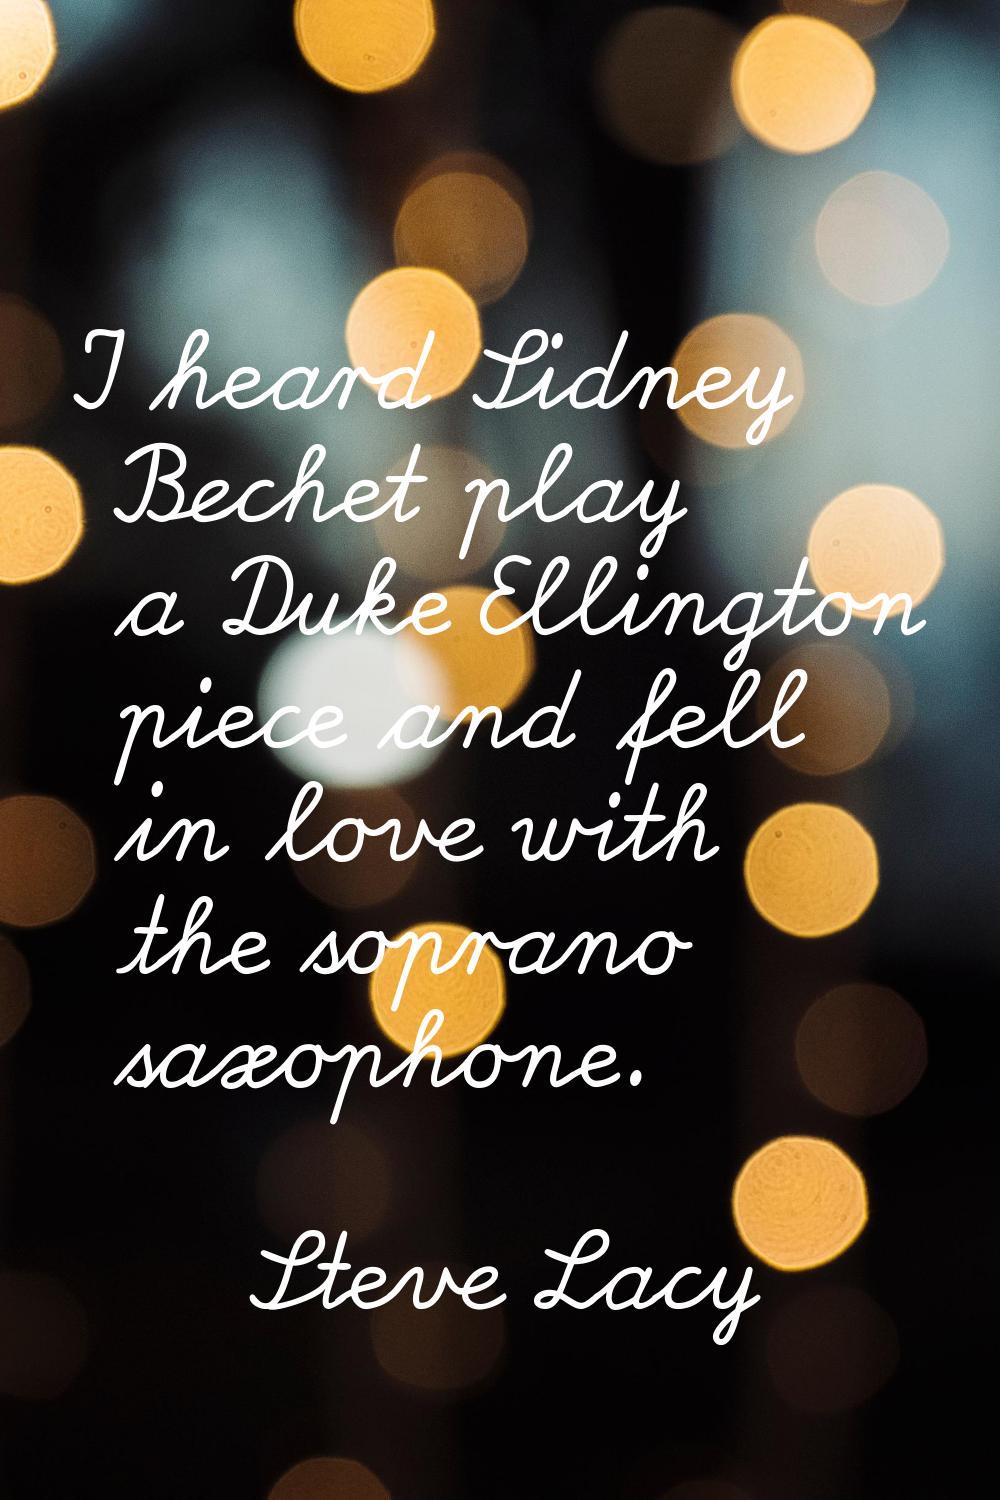 I heard Sidney Bechet play a Duke Ellington piece and fell in love with the soprano saxophone.